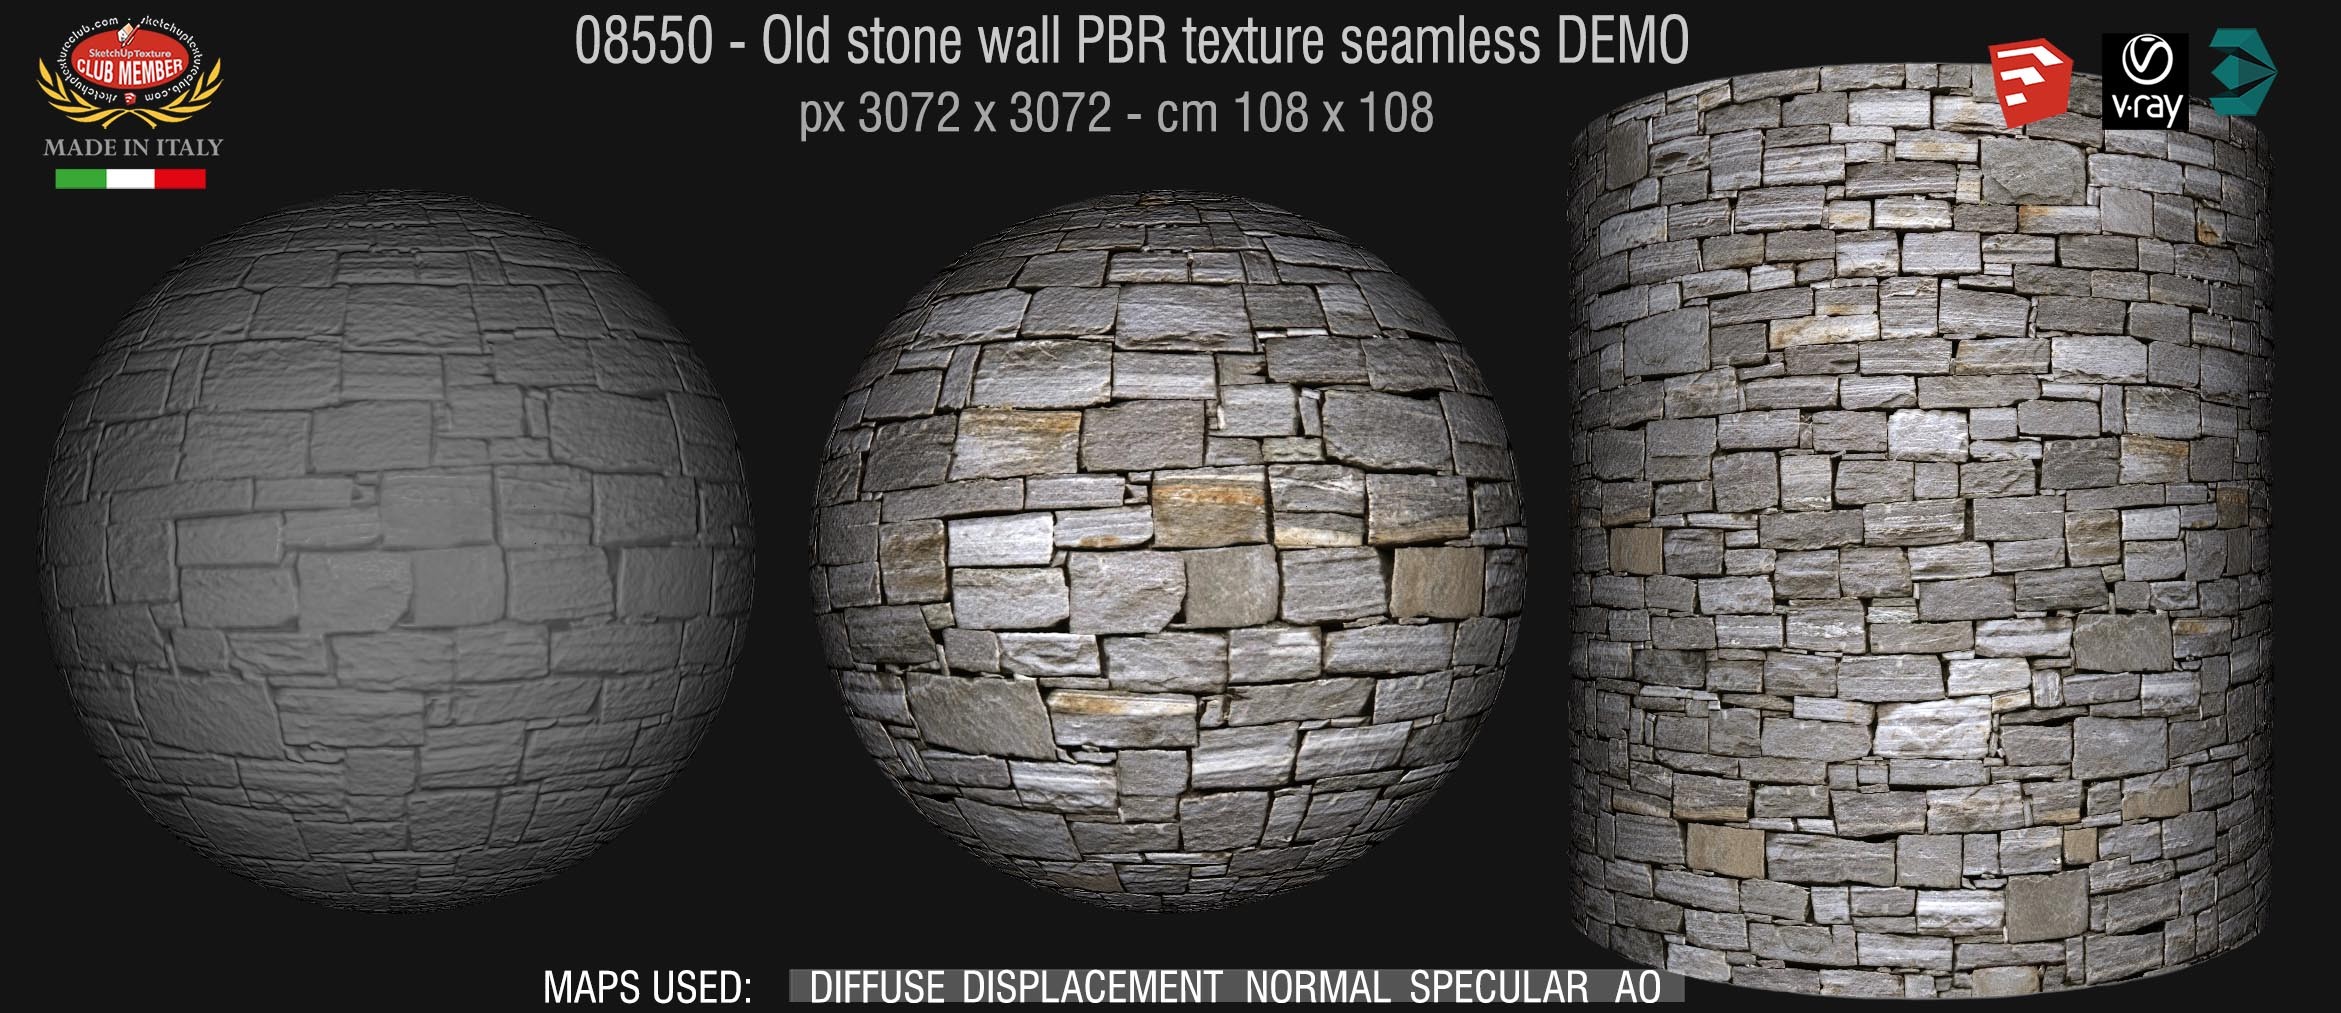 08550 Old stone wall PBR texture seamless DEMO